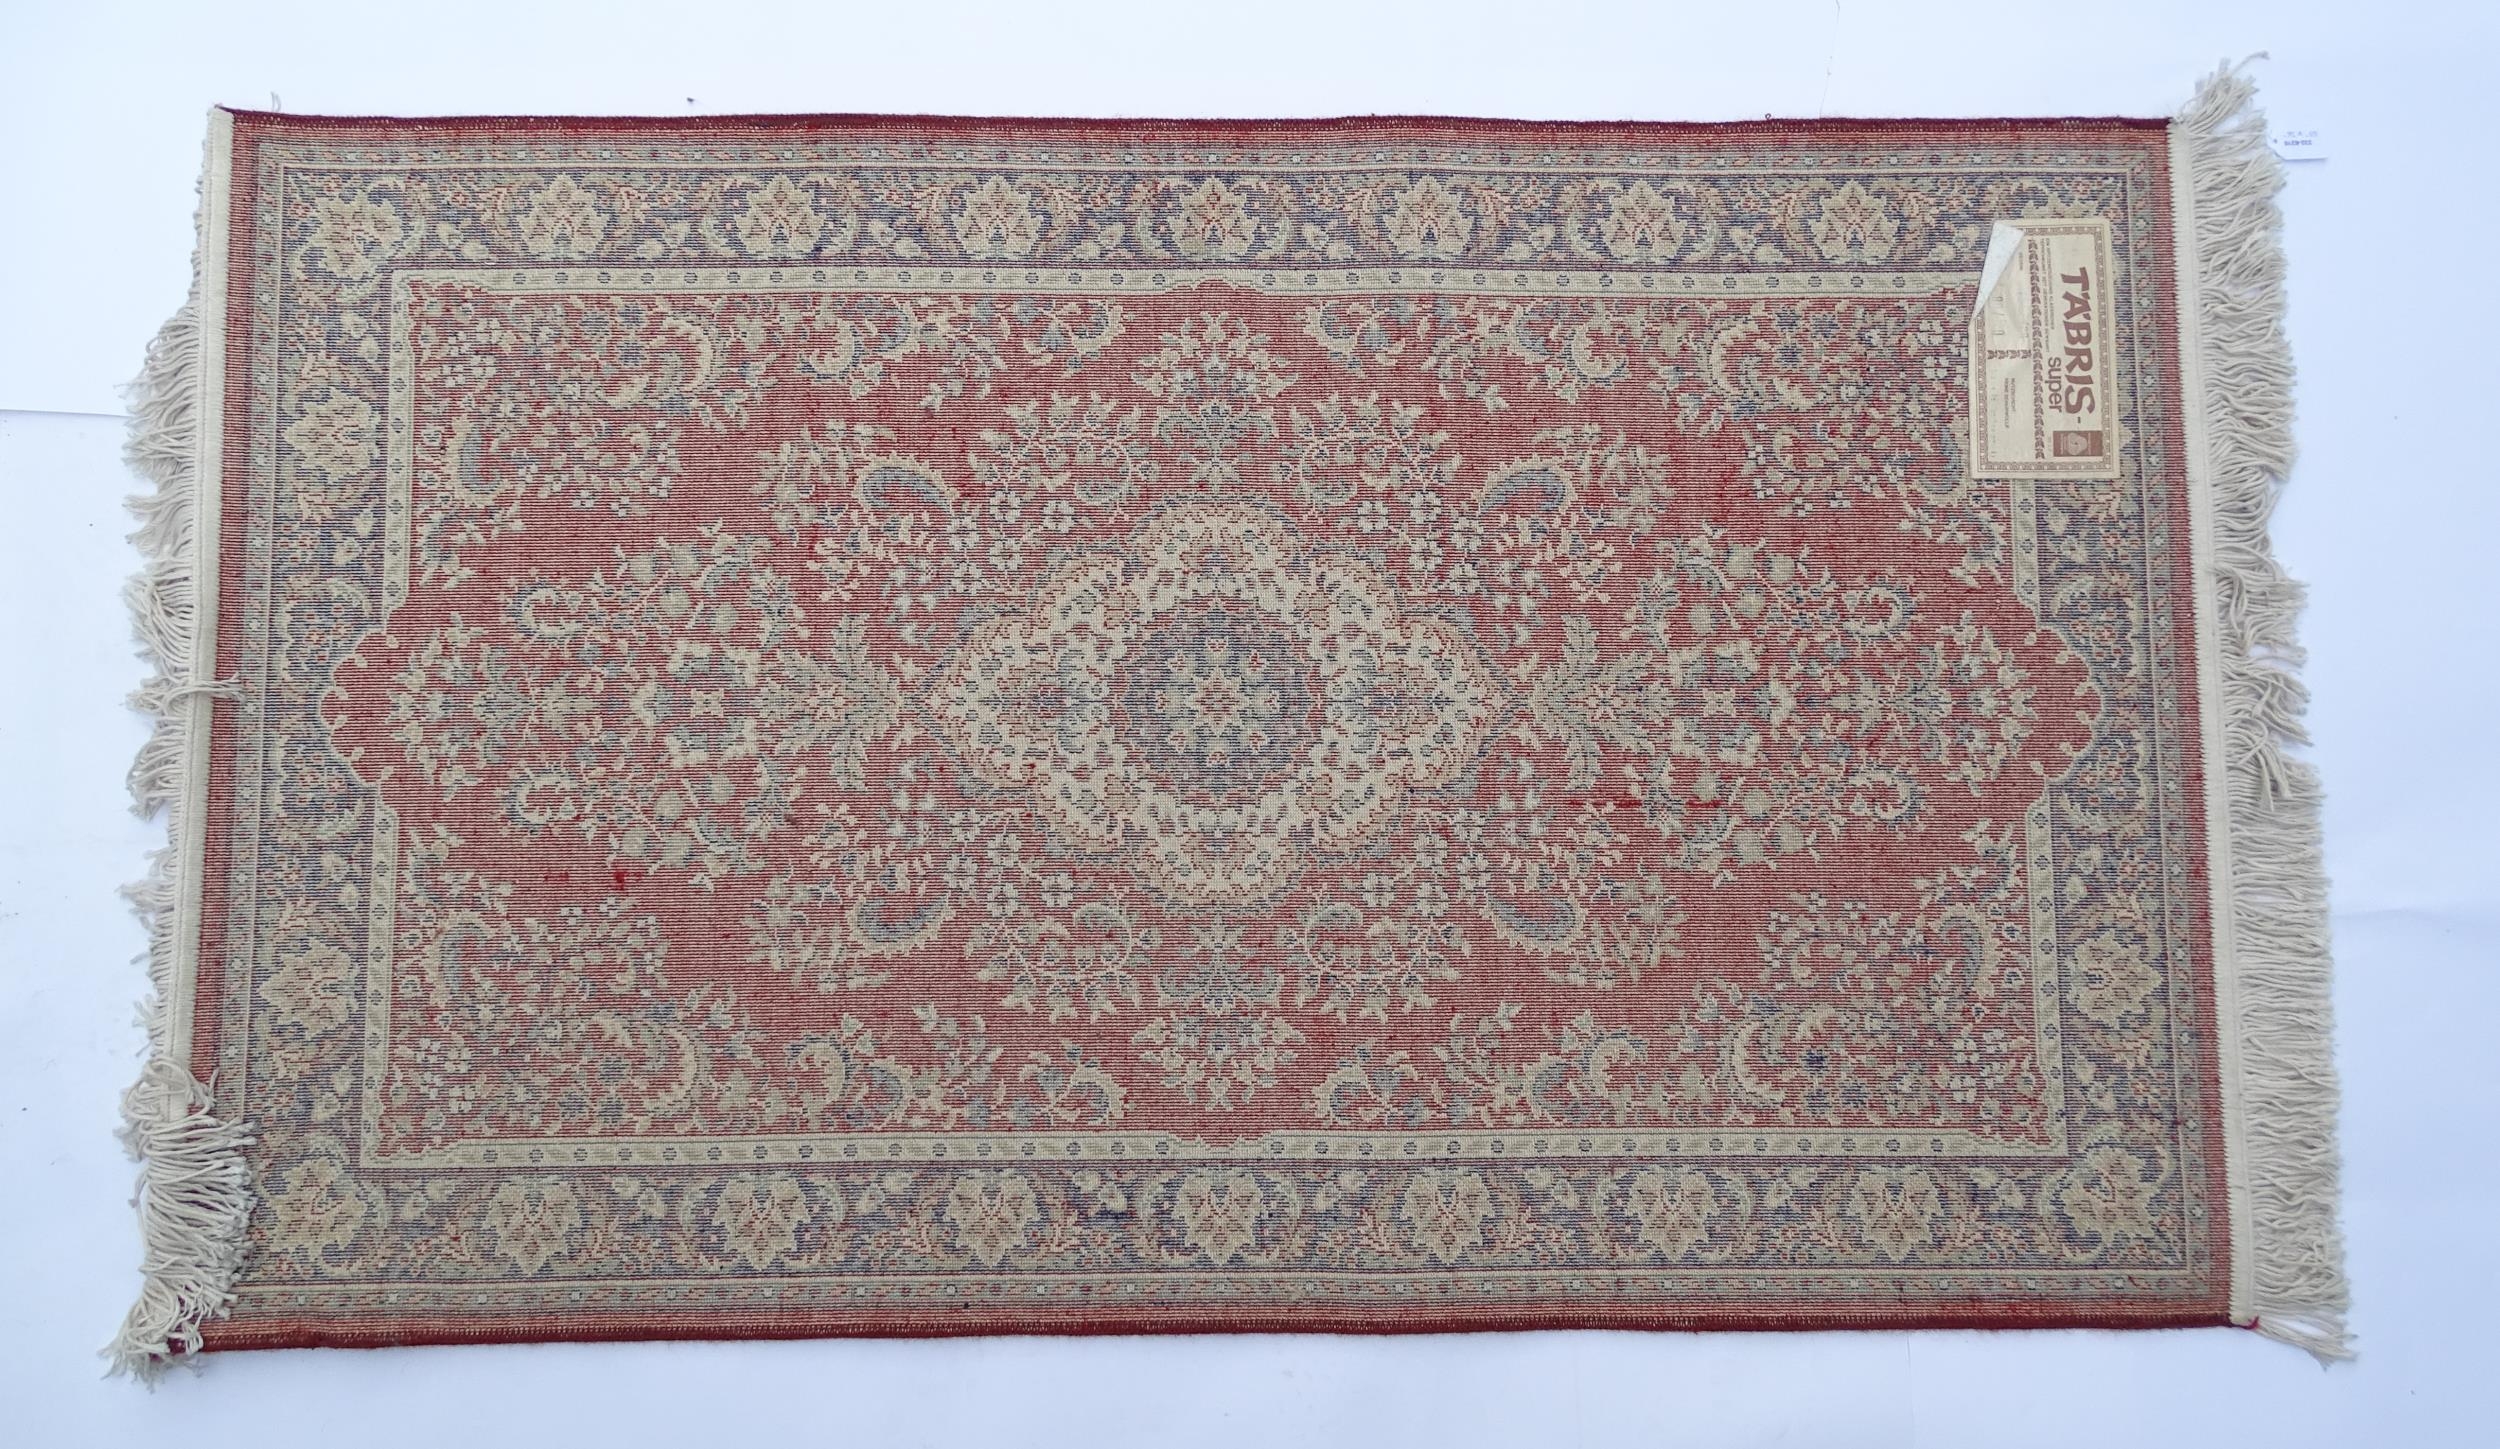 Carpet / Rug : A red ground rug with central cream and blue vignette, decorated with floral and - Image 2 of 6